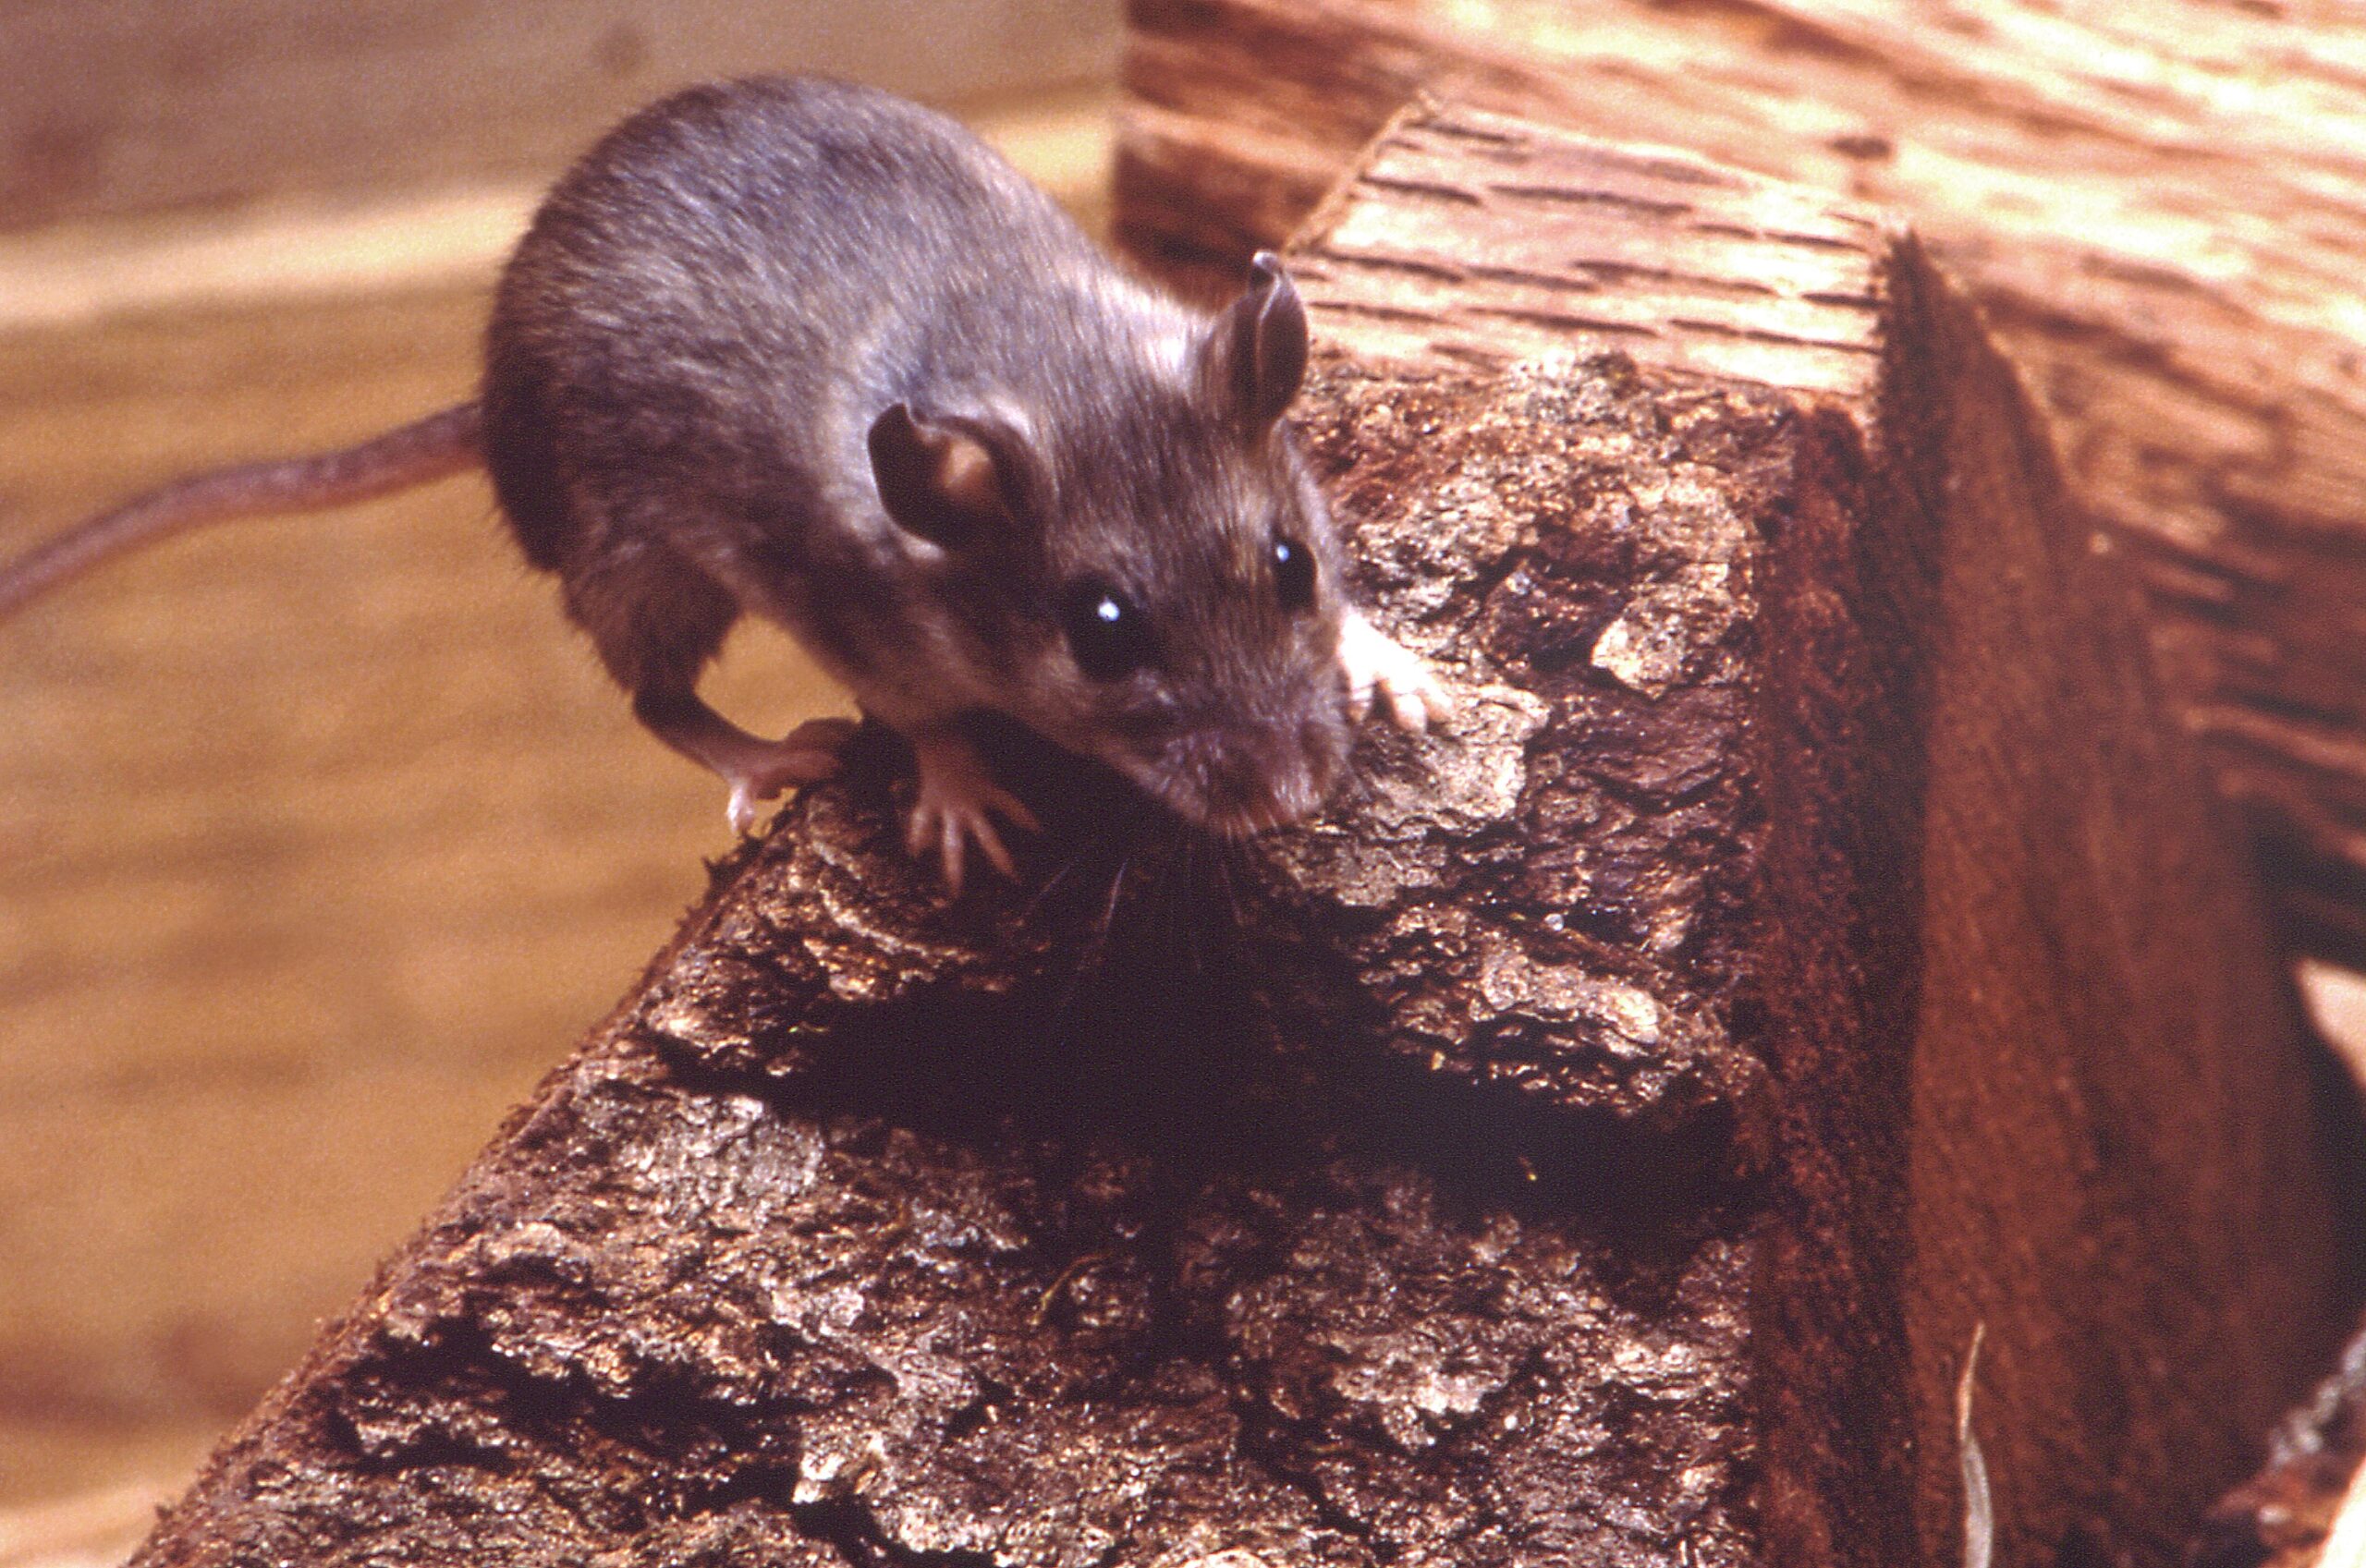 Deer mice are the principal reservoir of Sin Nombre (SN) virus, the primary etiologic agent of hantavirus cardiopulmonary syndrome (HCPS) in North America. A relatively-new acute respiratory illness, hantavirus pulmonary syndrome (HPS), was first documented in May, 1993, in New Mexico.